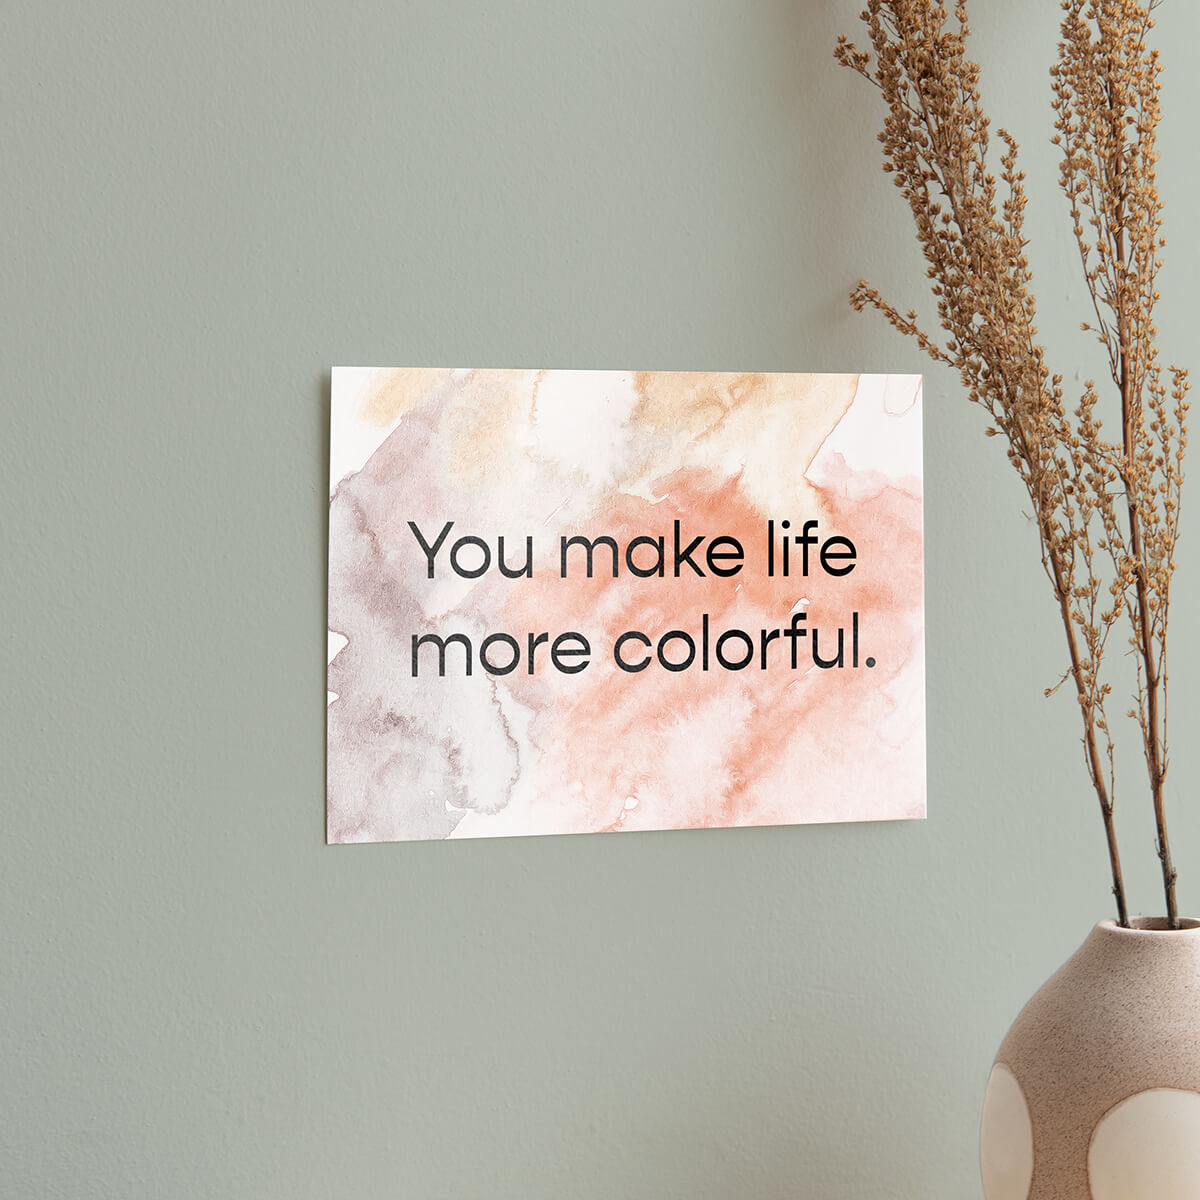 DIY postcard printed with the words you make life more colorful and painted in watercolor